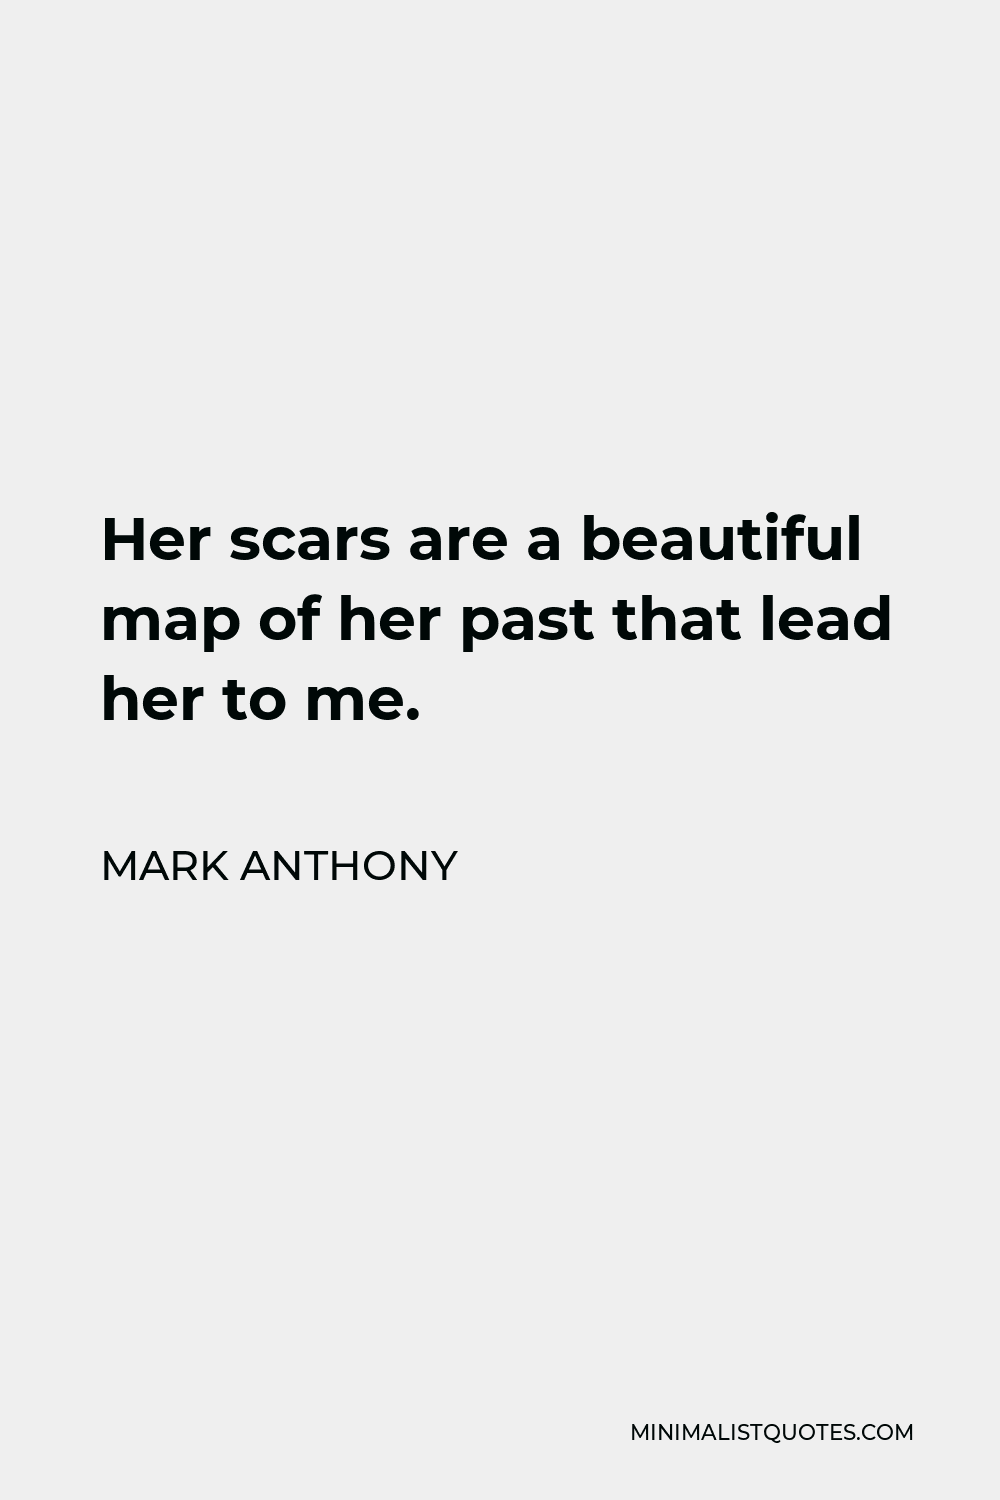 Mark Anthony Quote - Her scars are a beautiful map of her past that lead her to me.